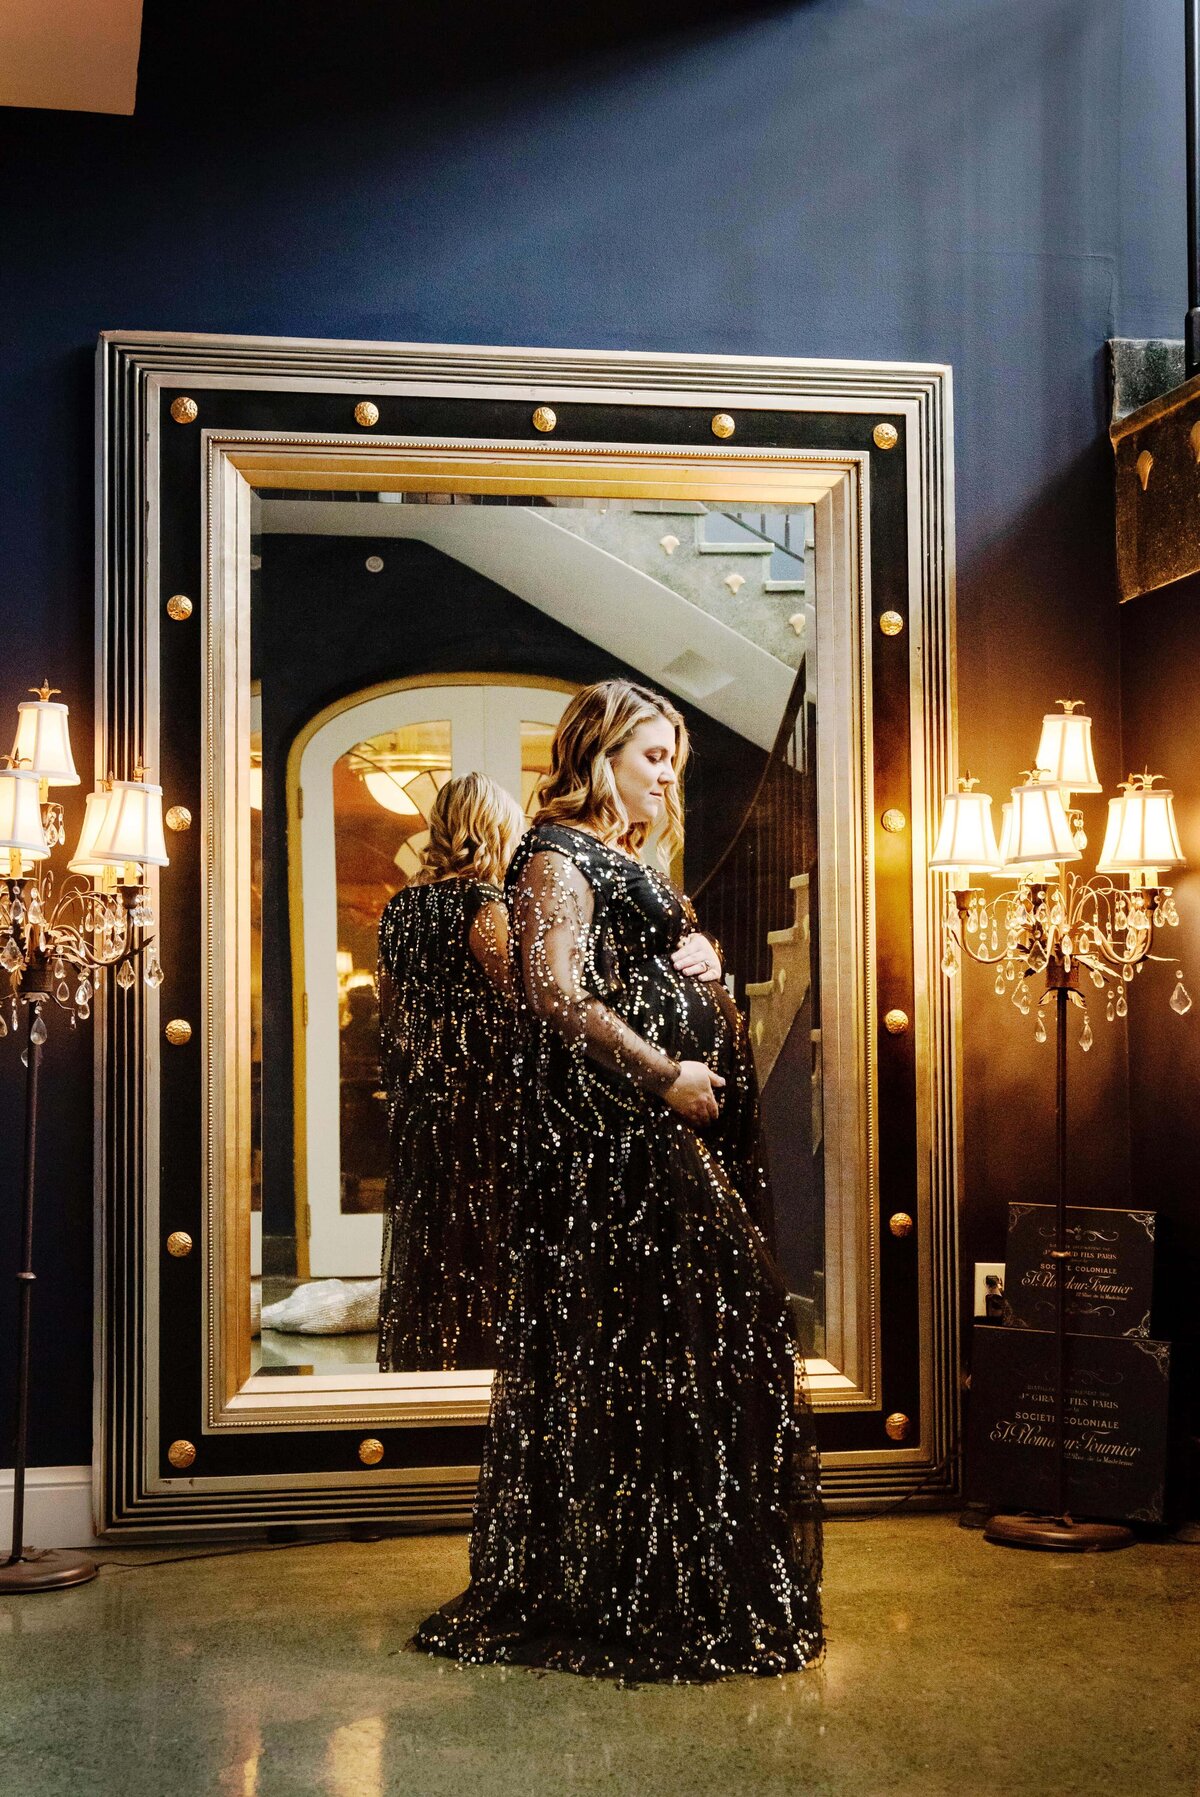 st-louis-maternity-photographer-pregnant-mom-in-front-of-large-mirror-wearing-black-and-gold-sequin-gown